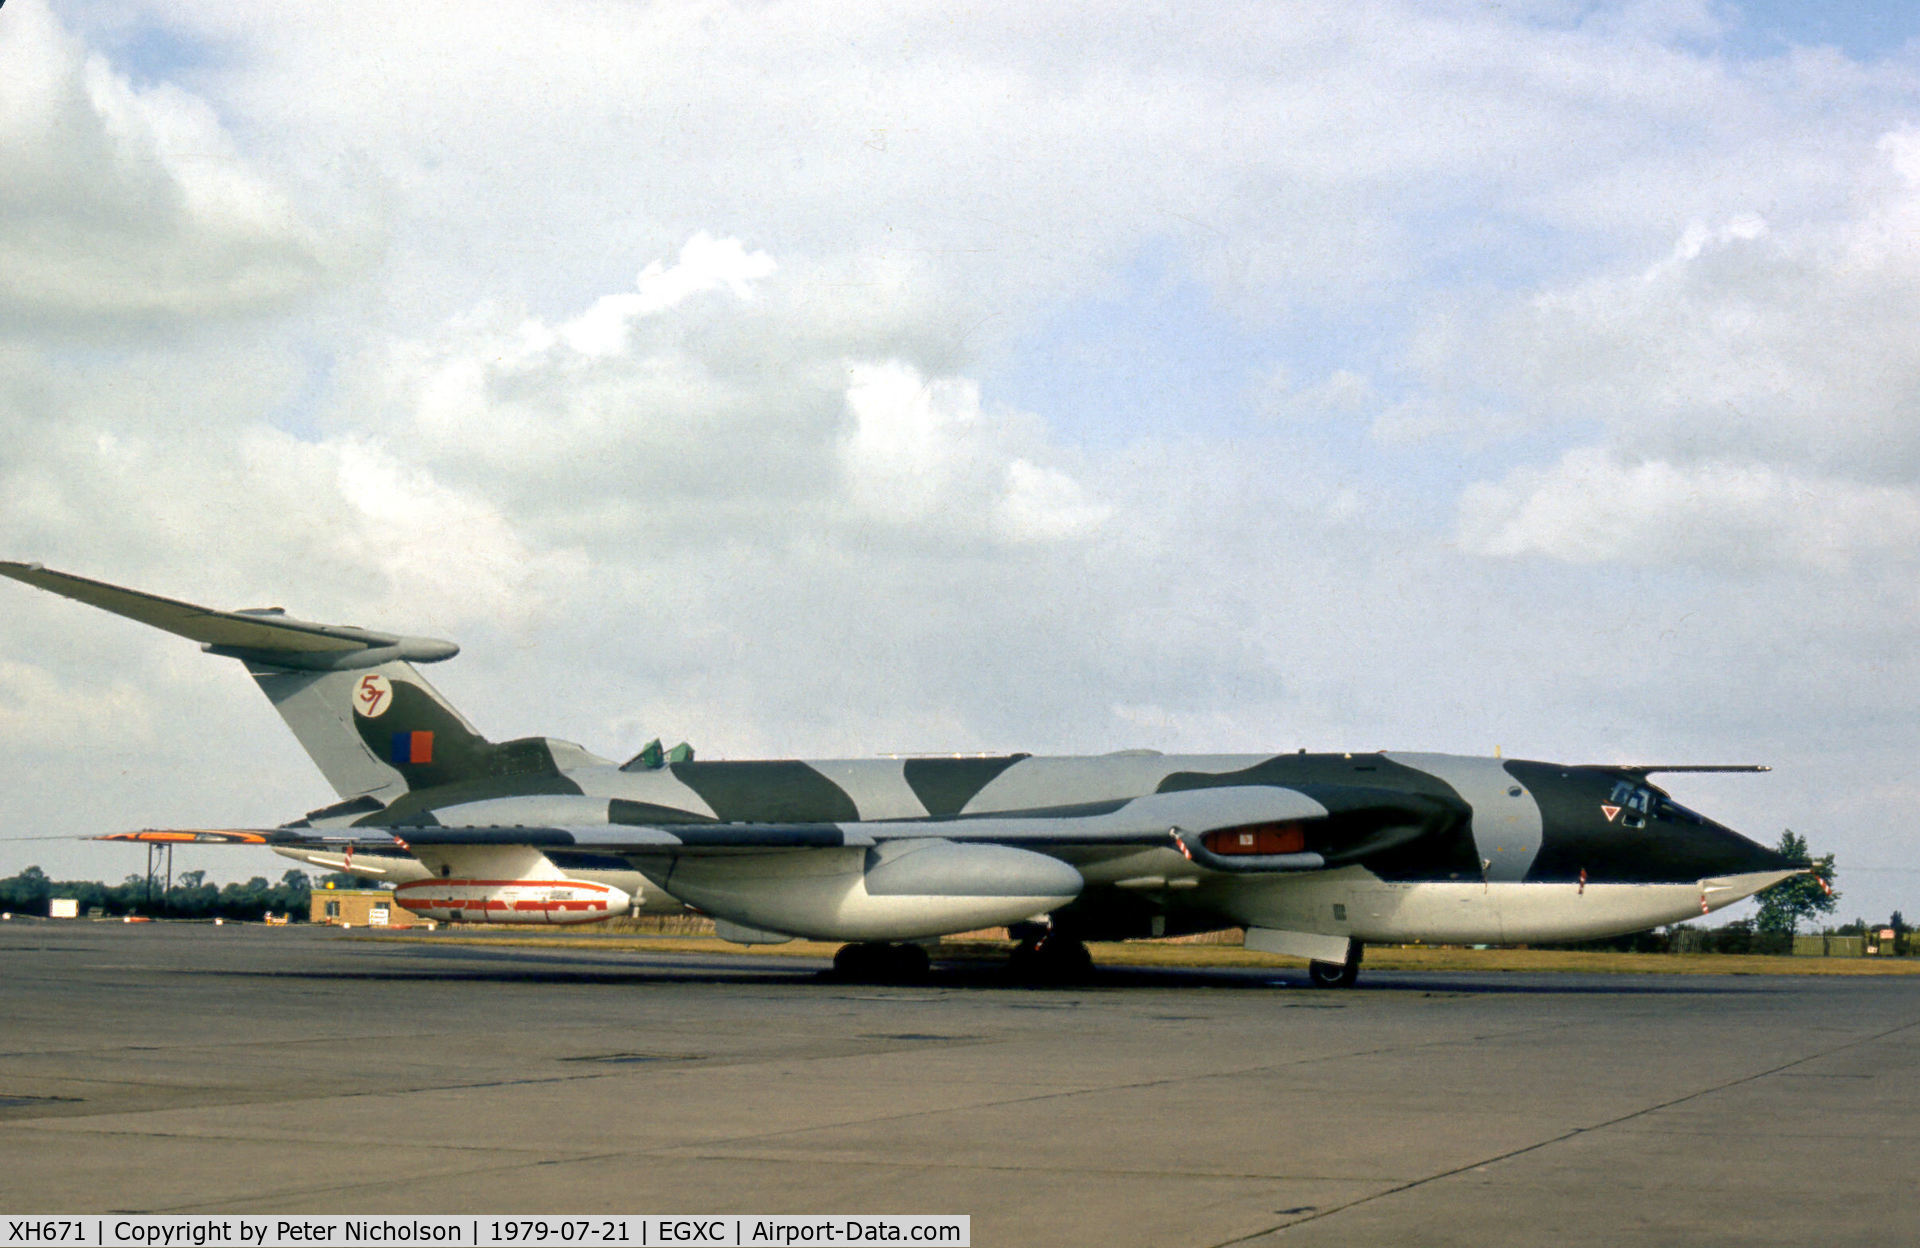 XH671, 1960 Handley Page Victor K.2 C/N HP80/56, Victor K.2 of 57 Squadron at RAF Marham on display at the 1979 RAF Coningsby Airshow.